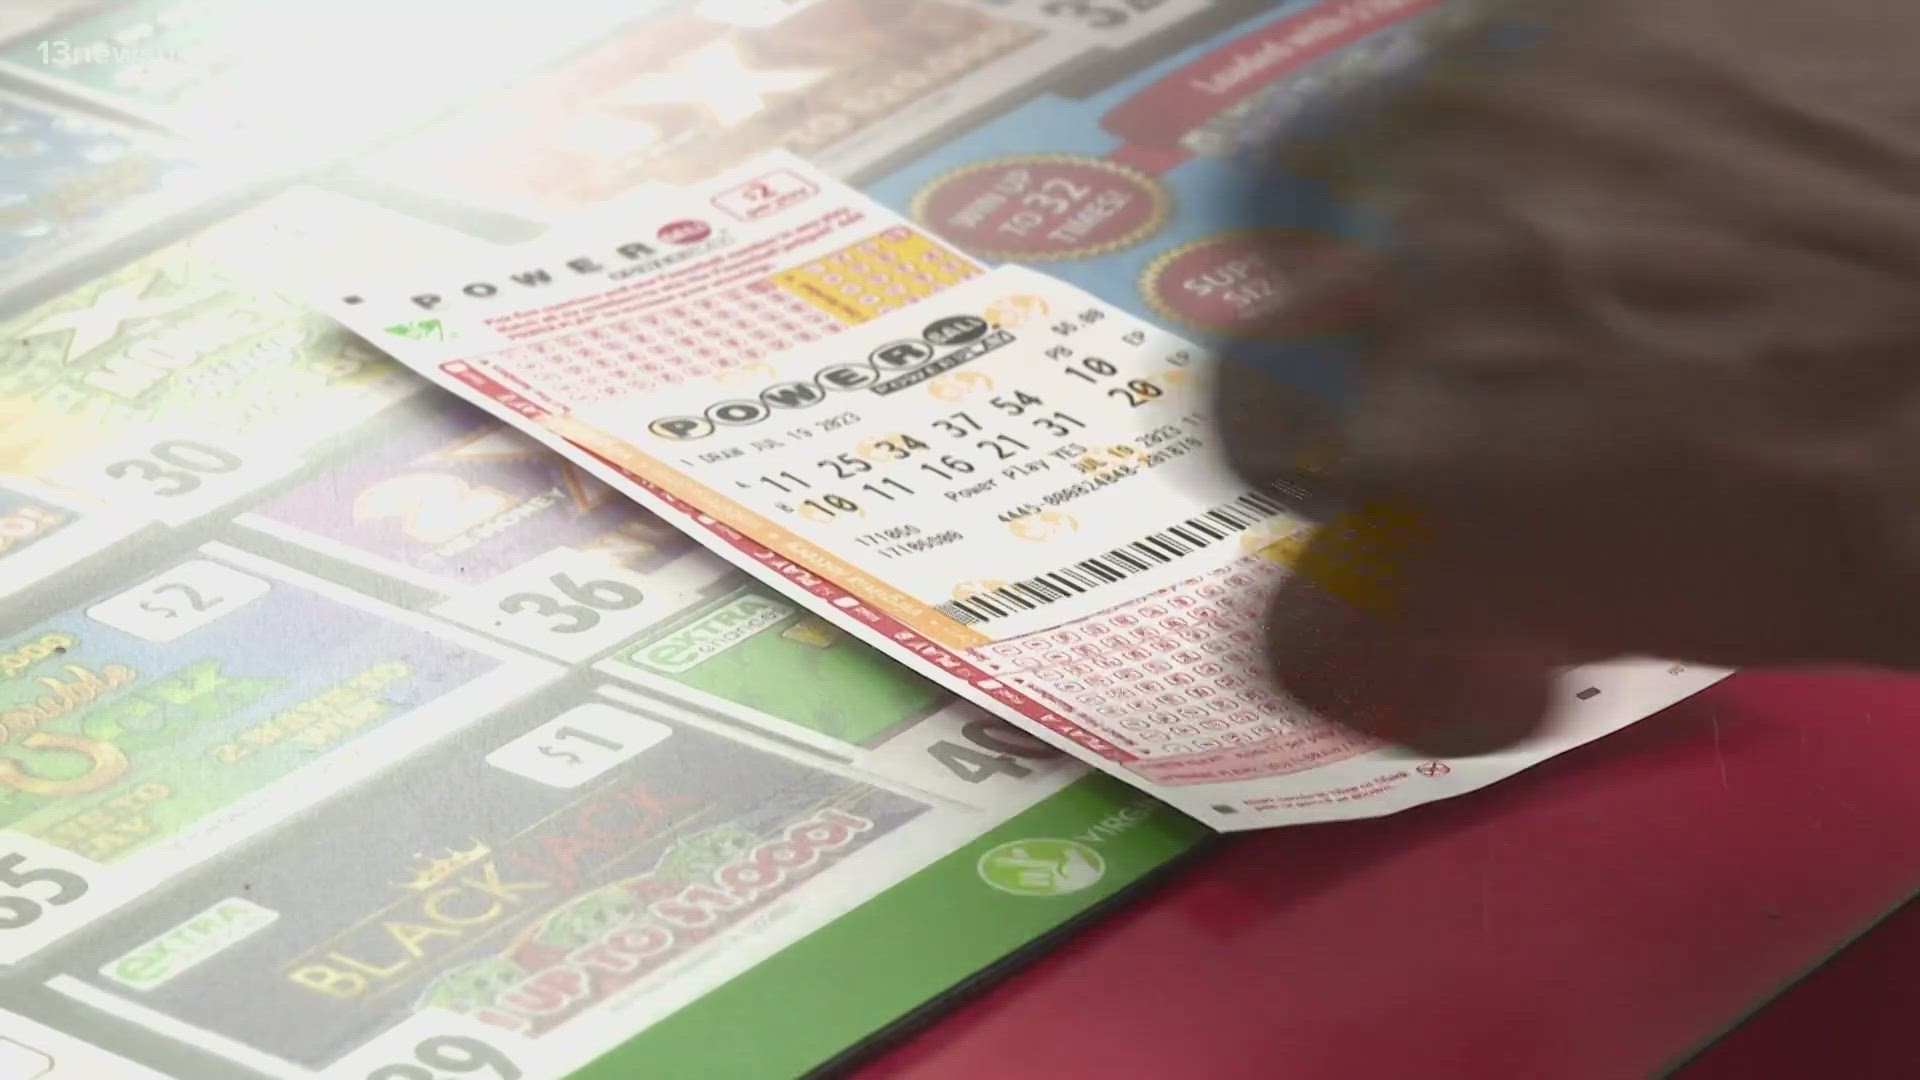 21 Texas Lottery Scratch Offs With Huge Jackpots You Could Win